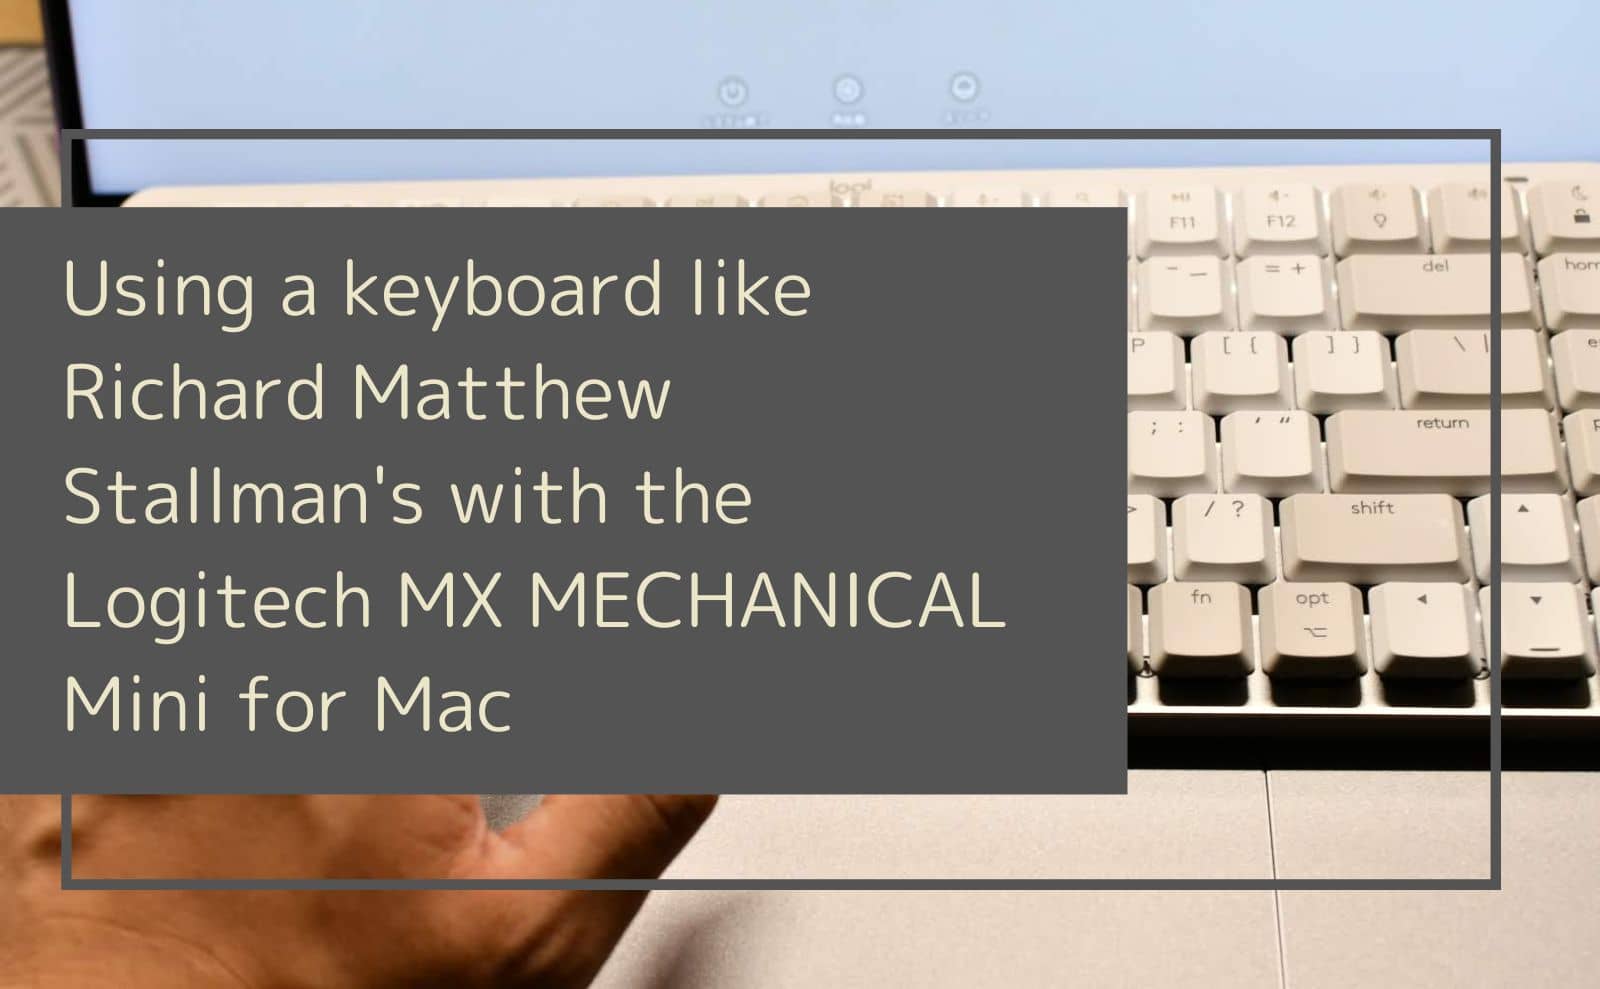 Can the Logitech MX MECHANICAL Mini for Mac be used in the